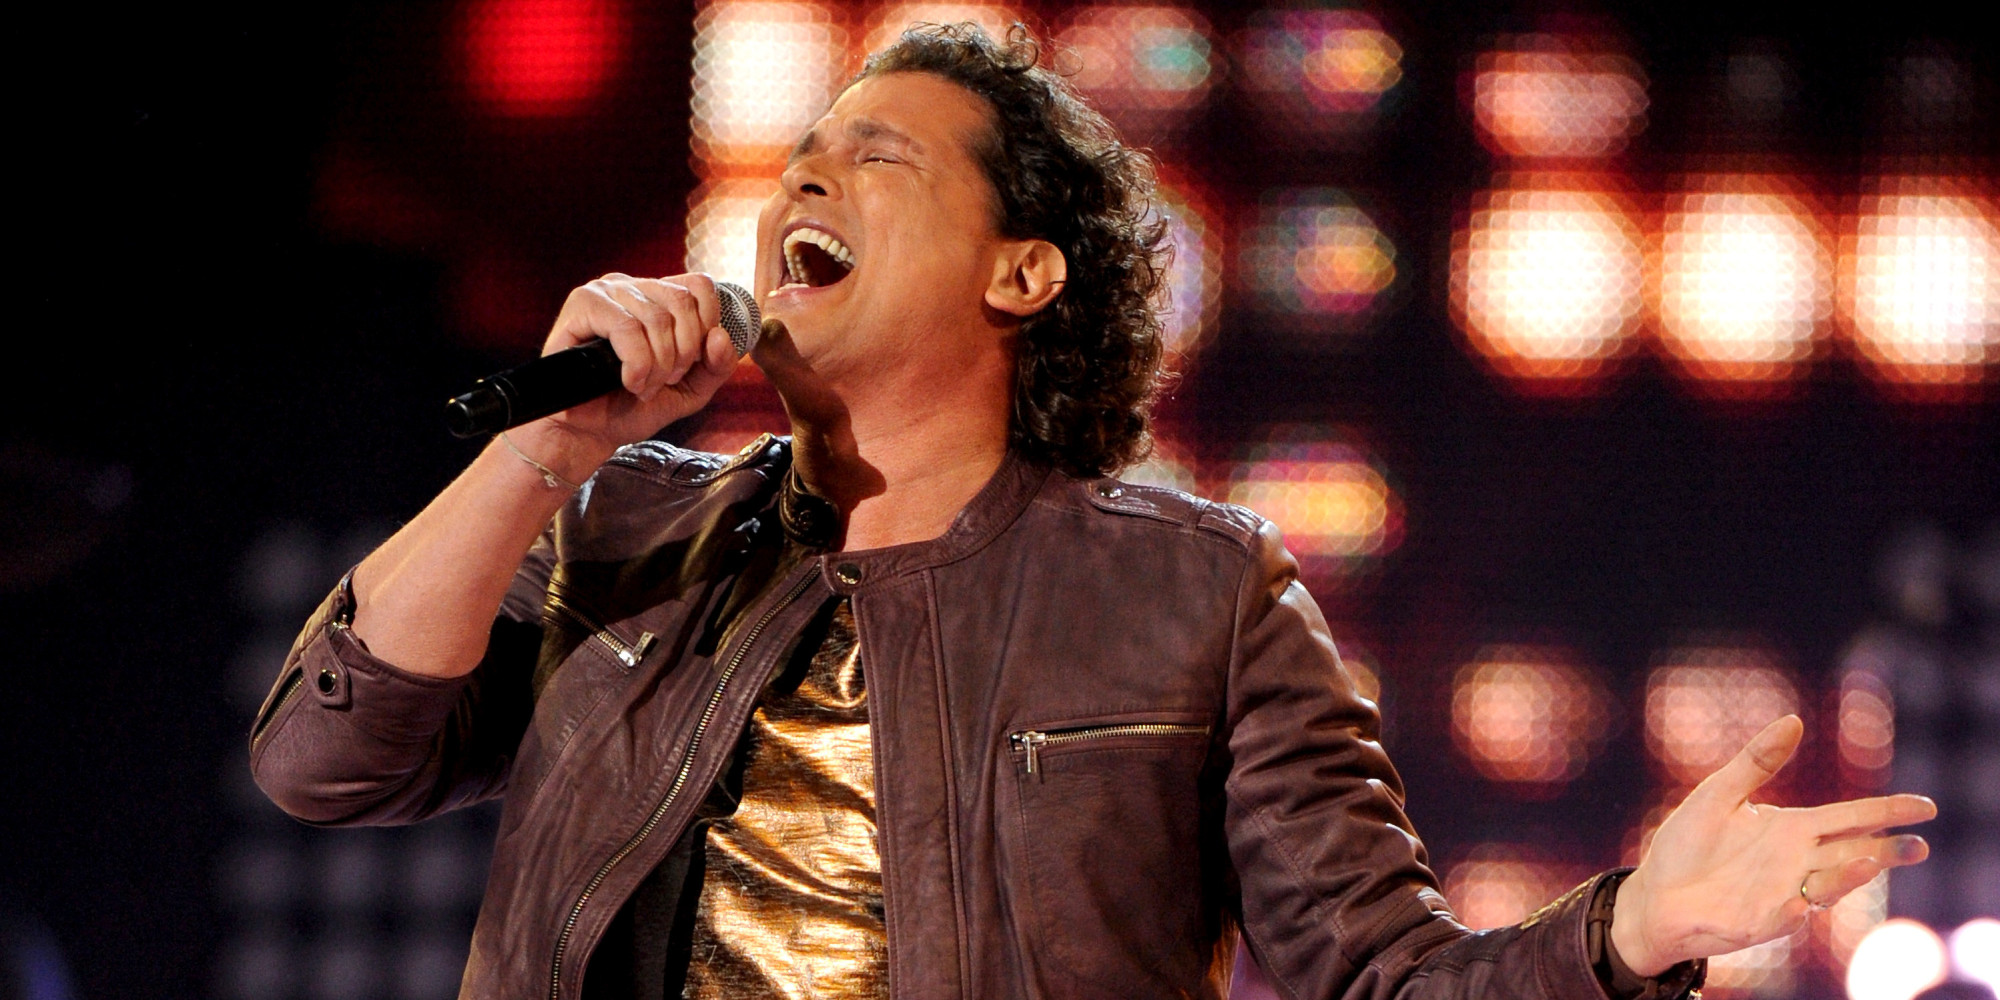 Carlos Vives performs onstage at the 14th Annual Latin Grammy Awards at the Mandalay Bay Hotel and Casino on Thursday, Nov. 21, 2013, in Las Vegas. (Photo by Frank Micelotta/Invision/AP)